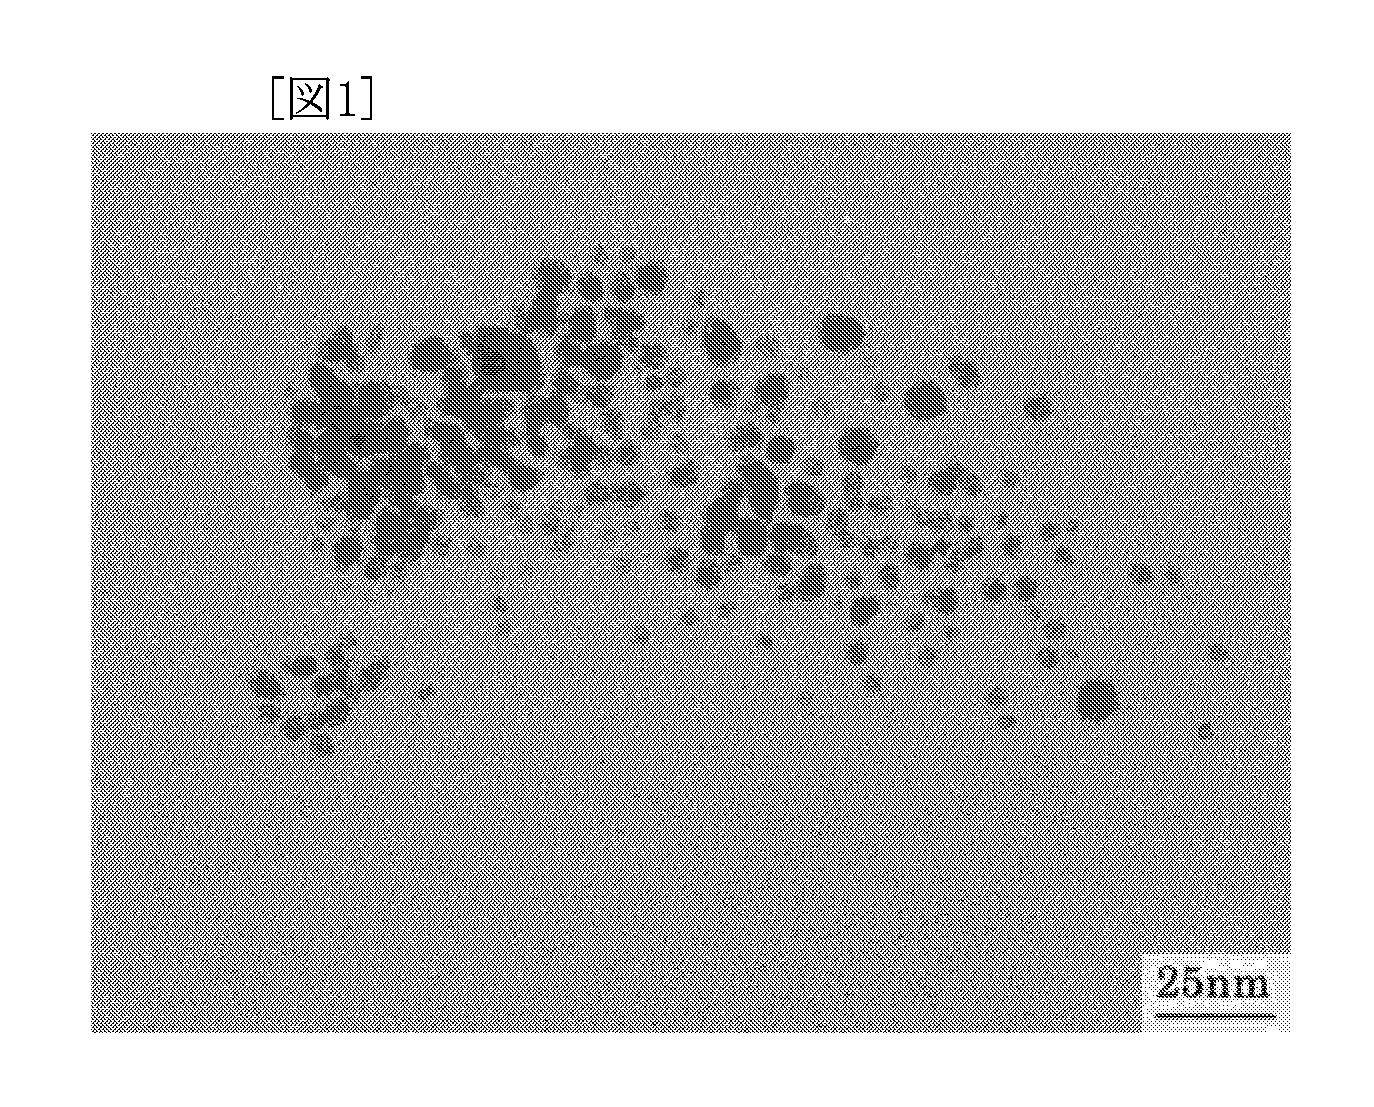 Method for Production Thermoplastic Resin Composition Containing Ultrafine Particles